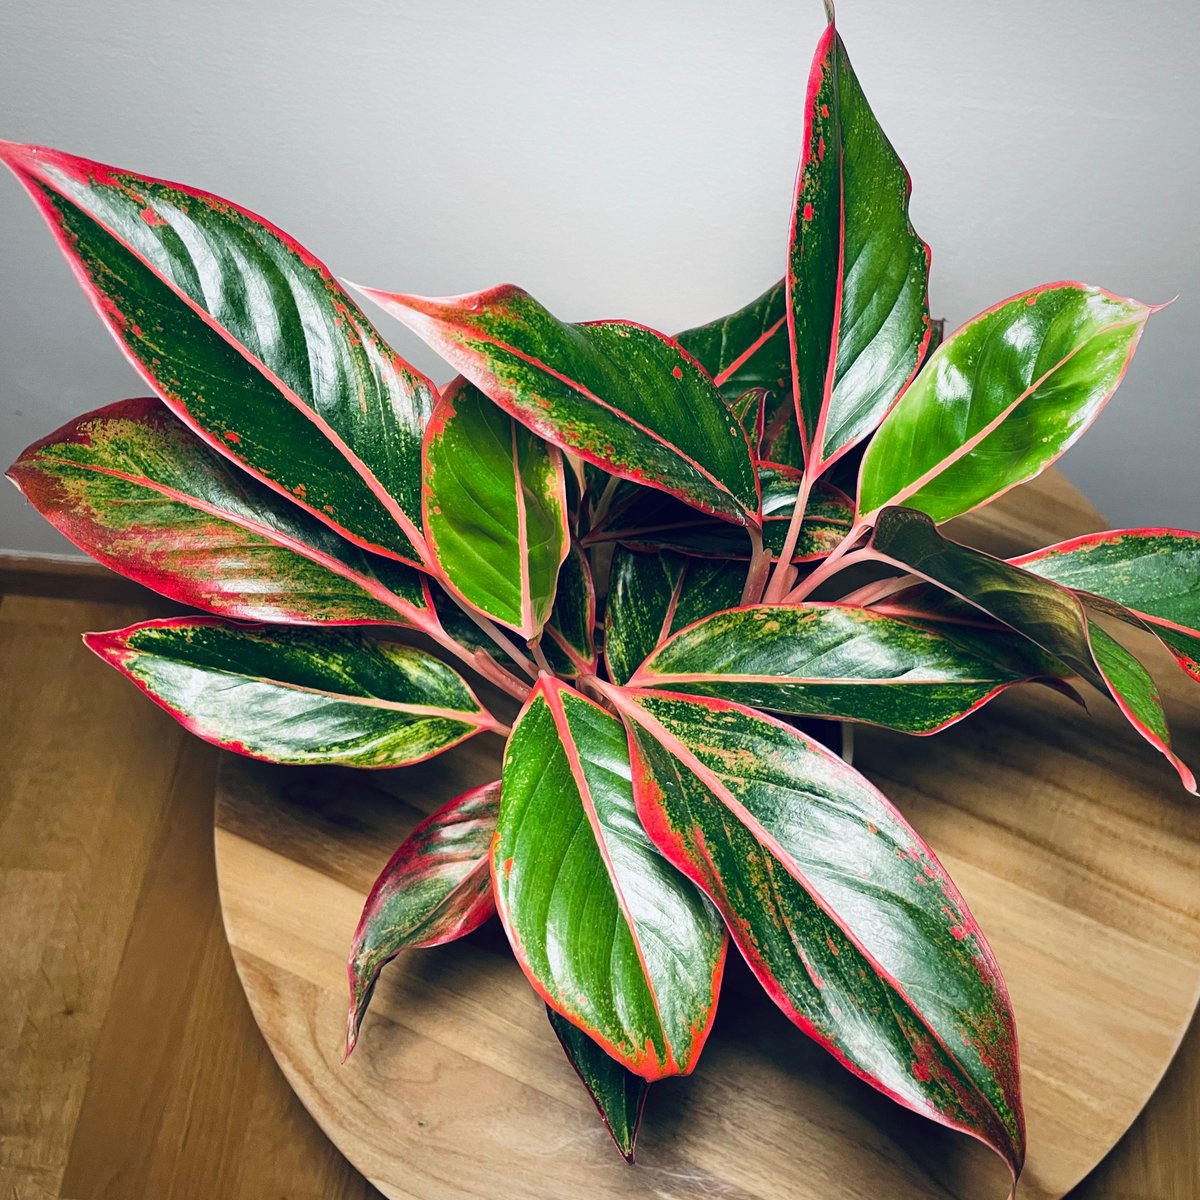 I'm still in awe of how beautiful Aglaonemas are. 🥰 #planttwitter #houseplants #houseplanthour #chineseevergreen